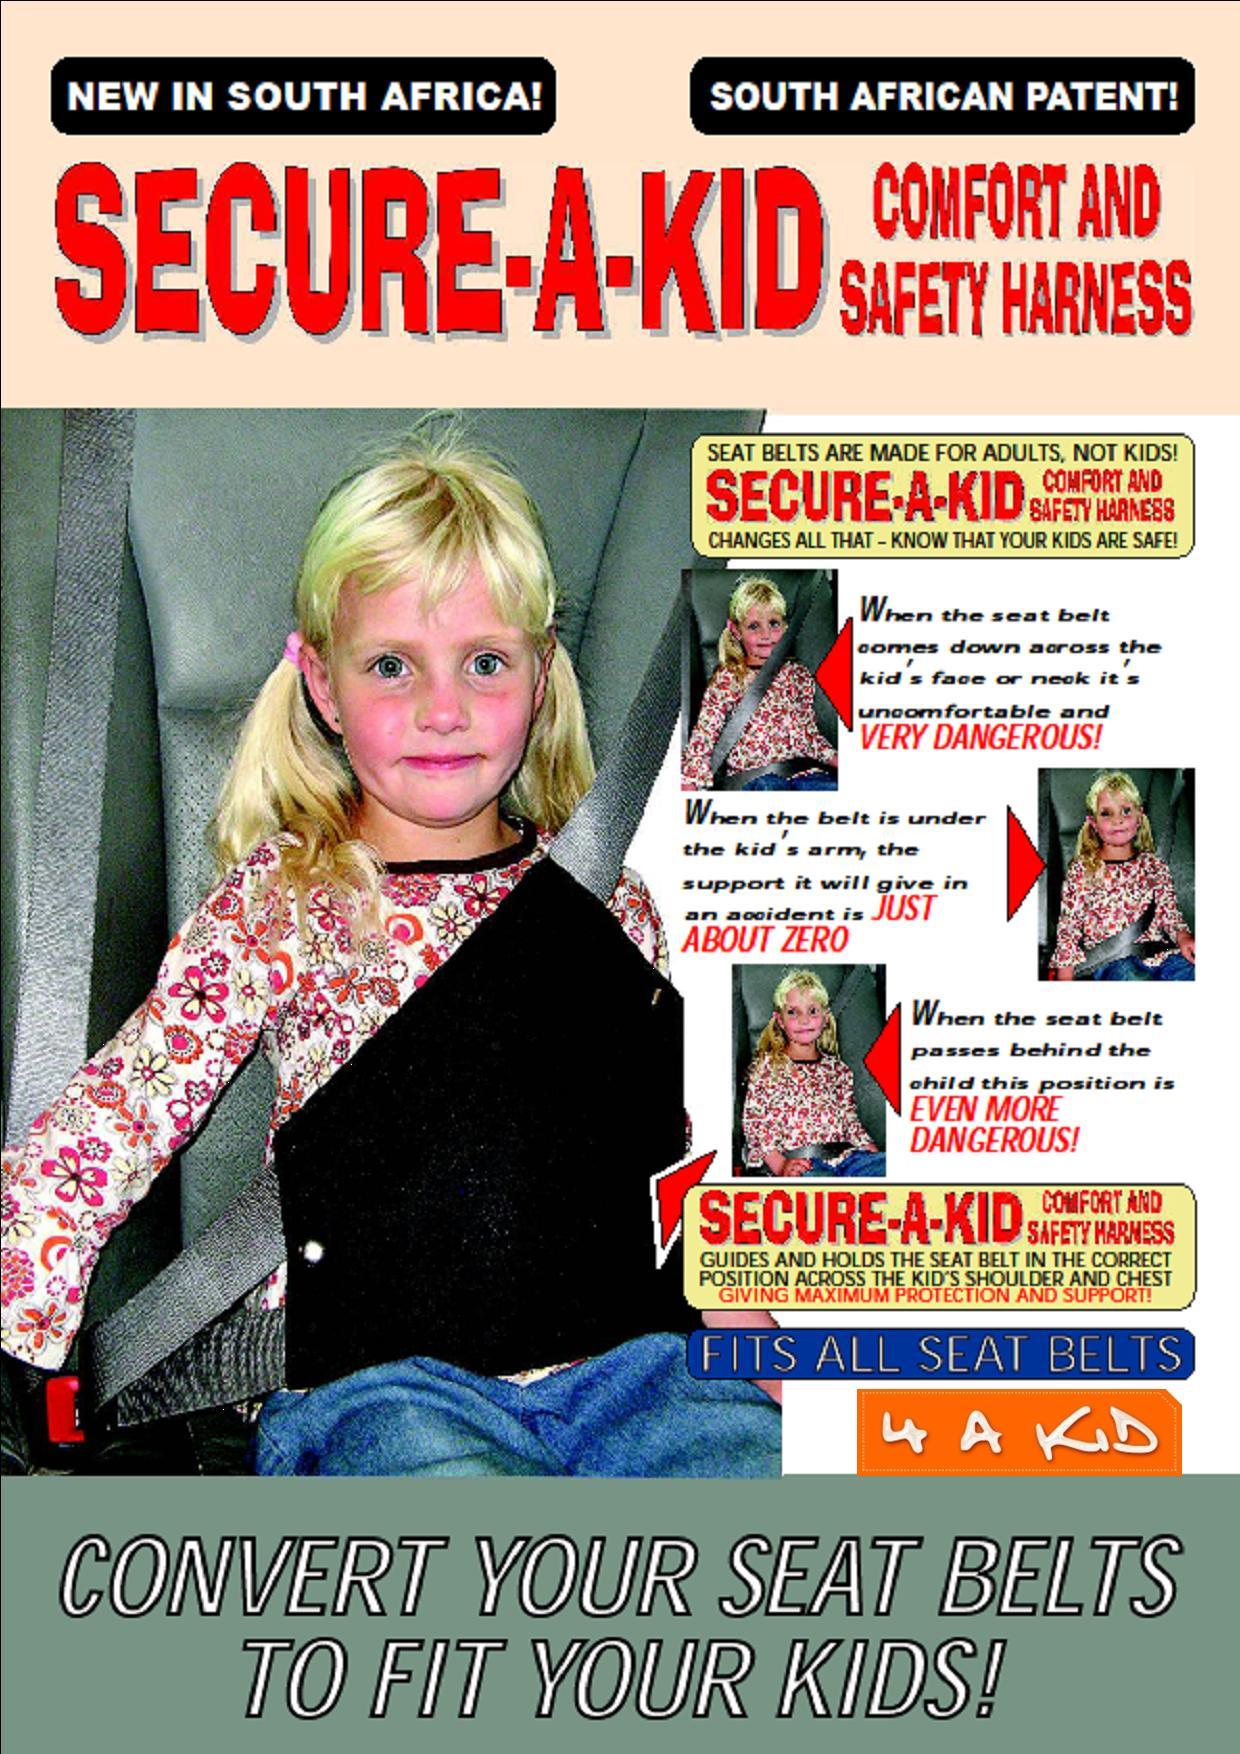 Secure-a-Kid Comfort Harness - 4aKid